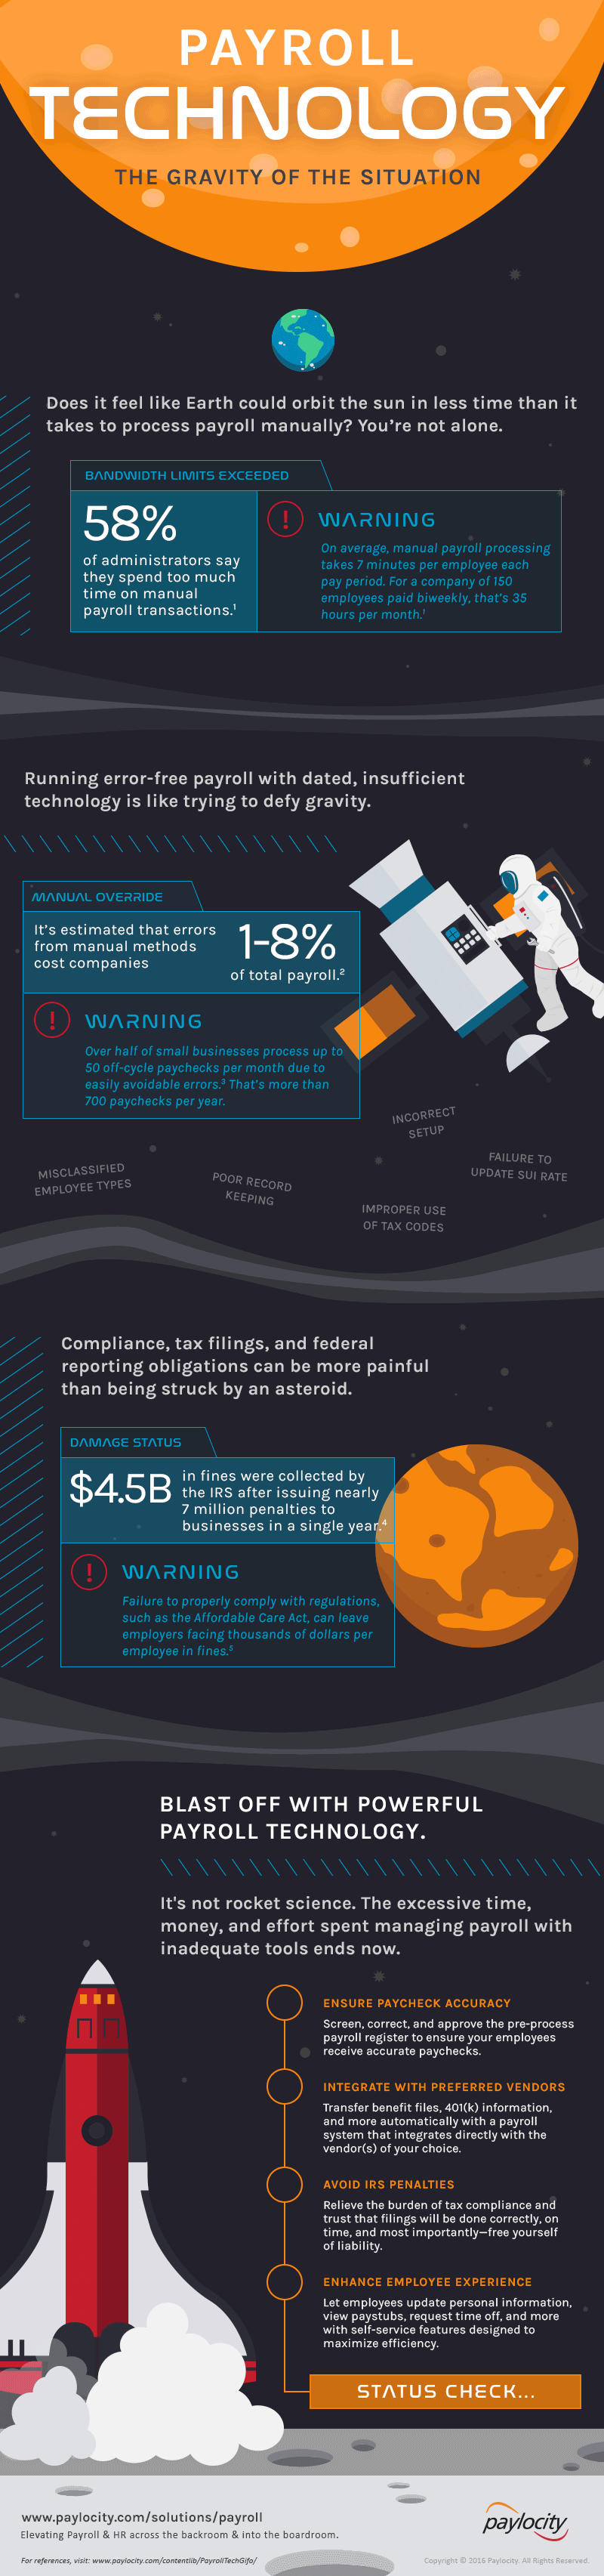 Payroll Technology: The Gravity of the Situation Infographic